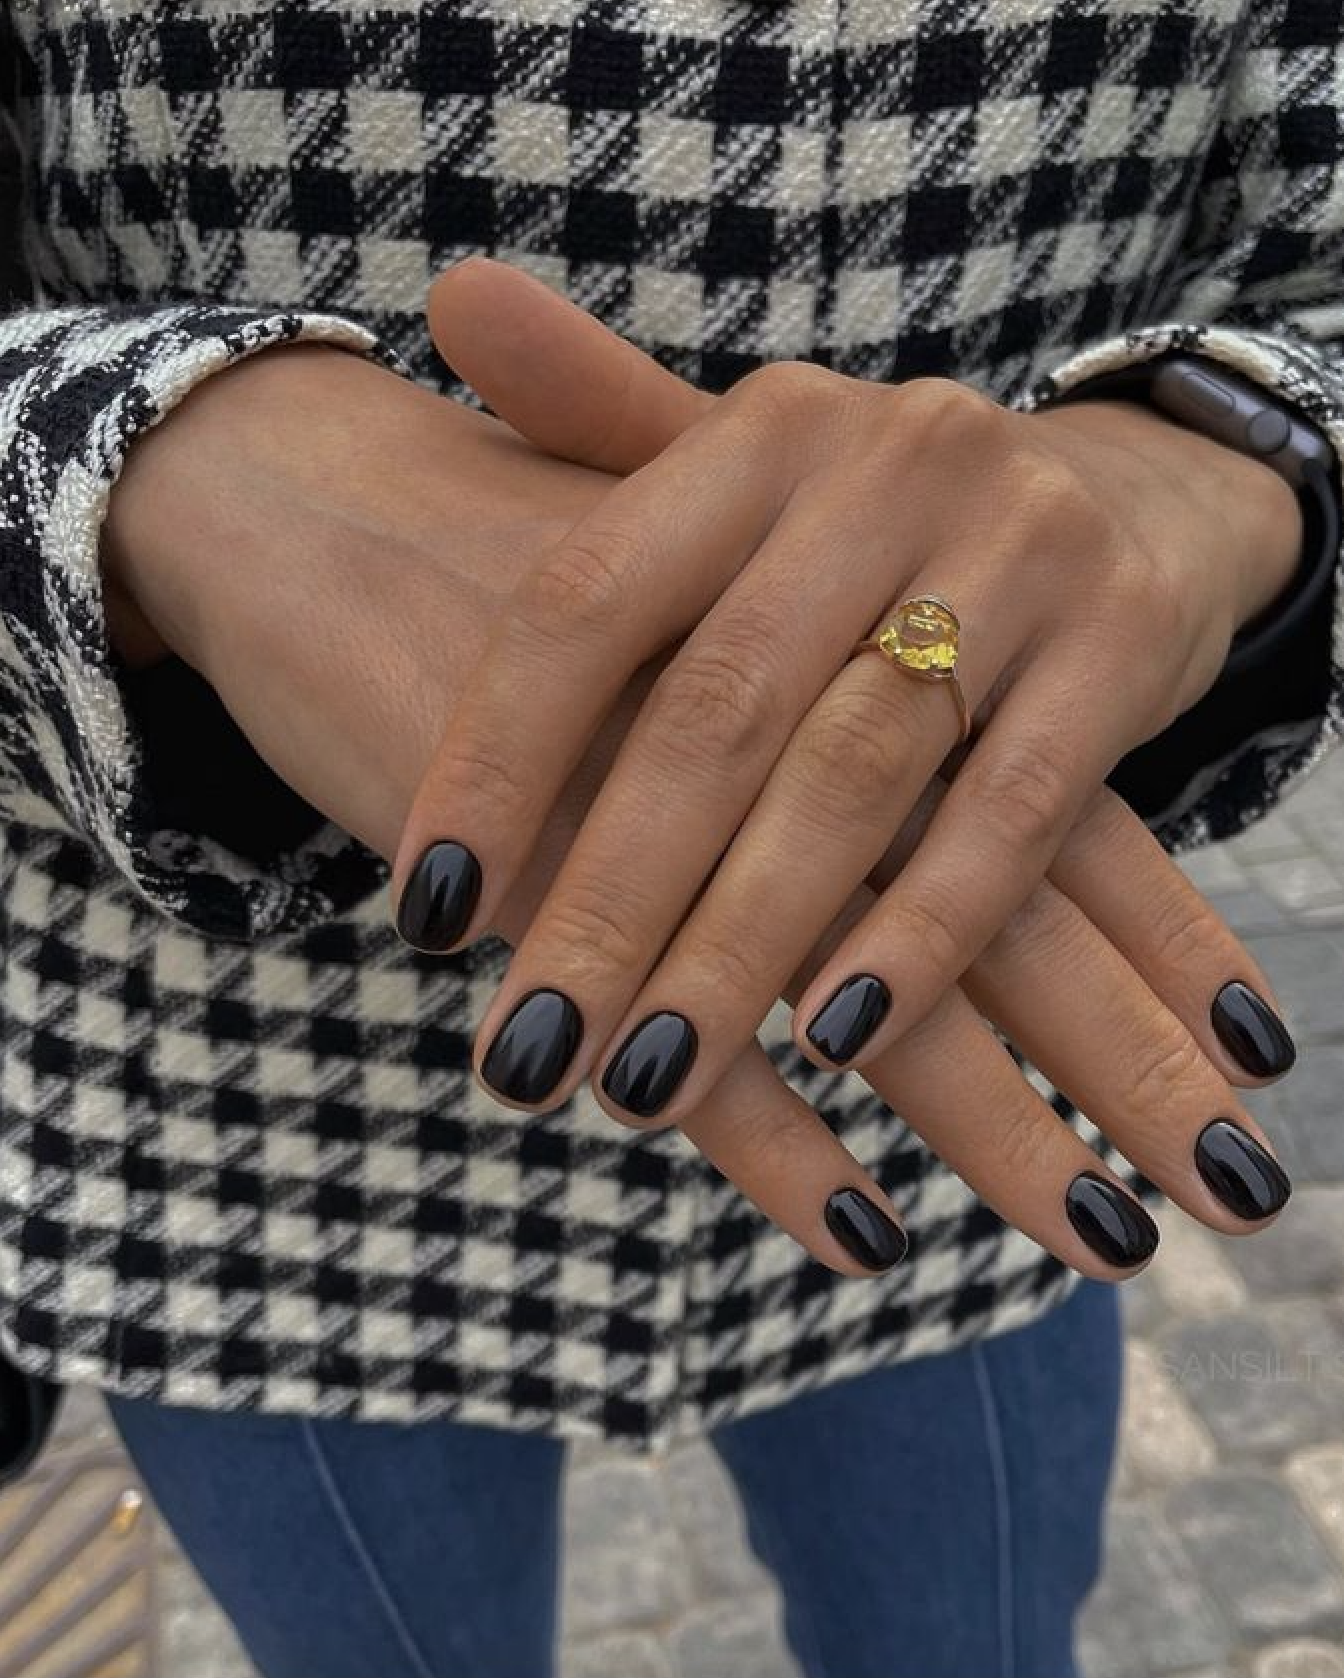 See You Next Time” Explores the Meaning of the Manicure for Black Women |  The New Yorker